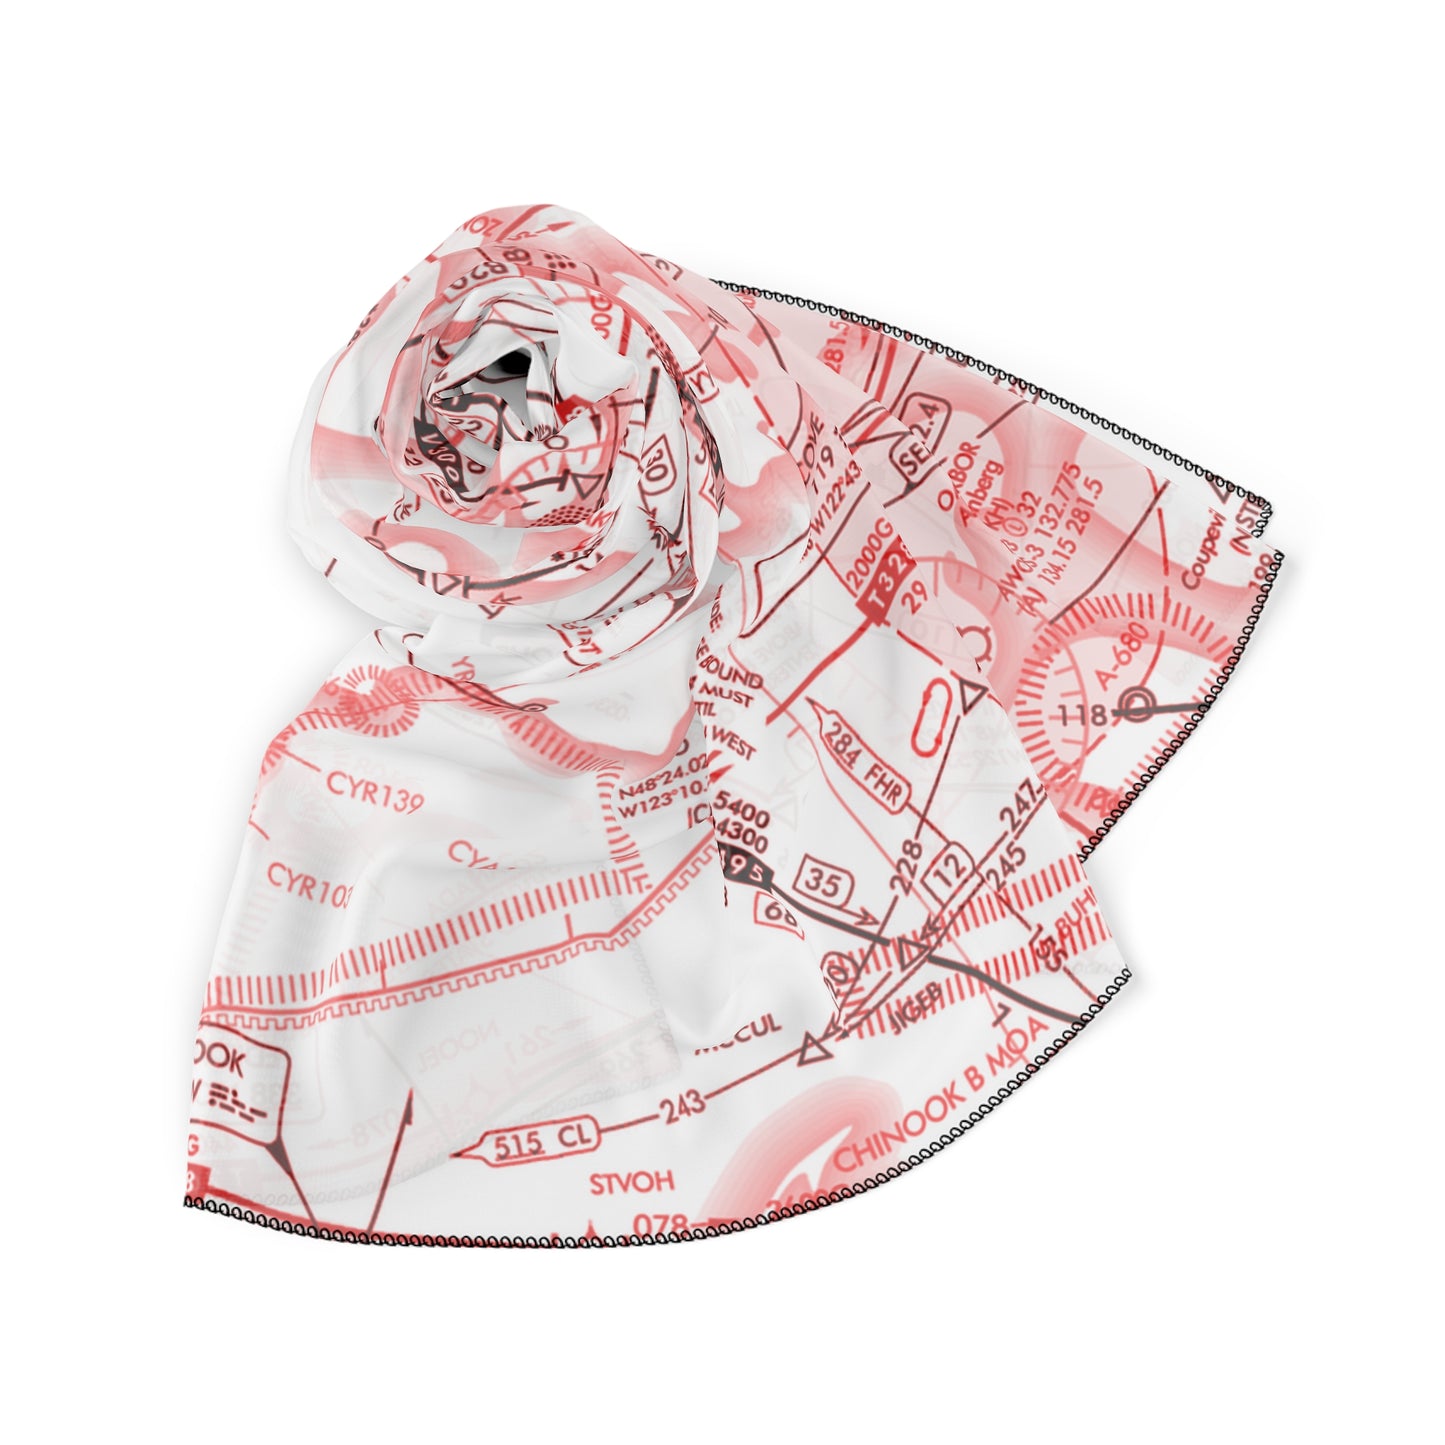 Enroute Low Altitude Chart (red&white) poly scarf